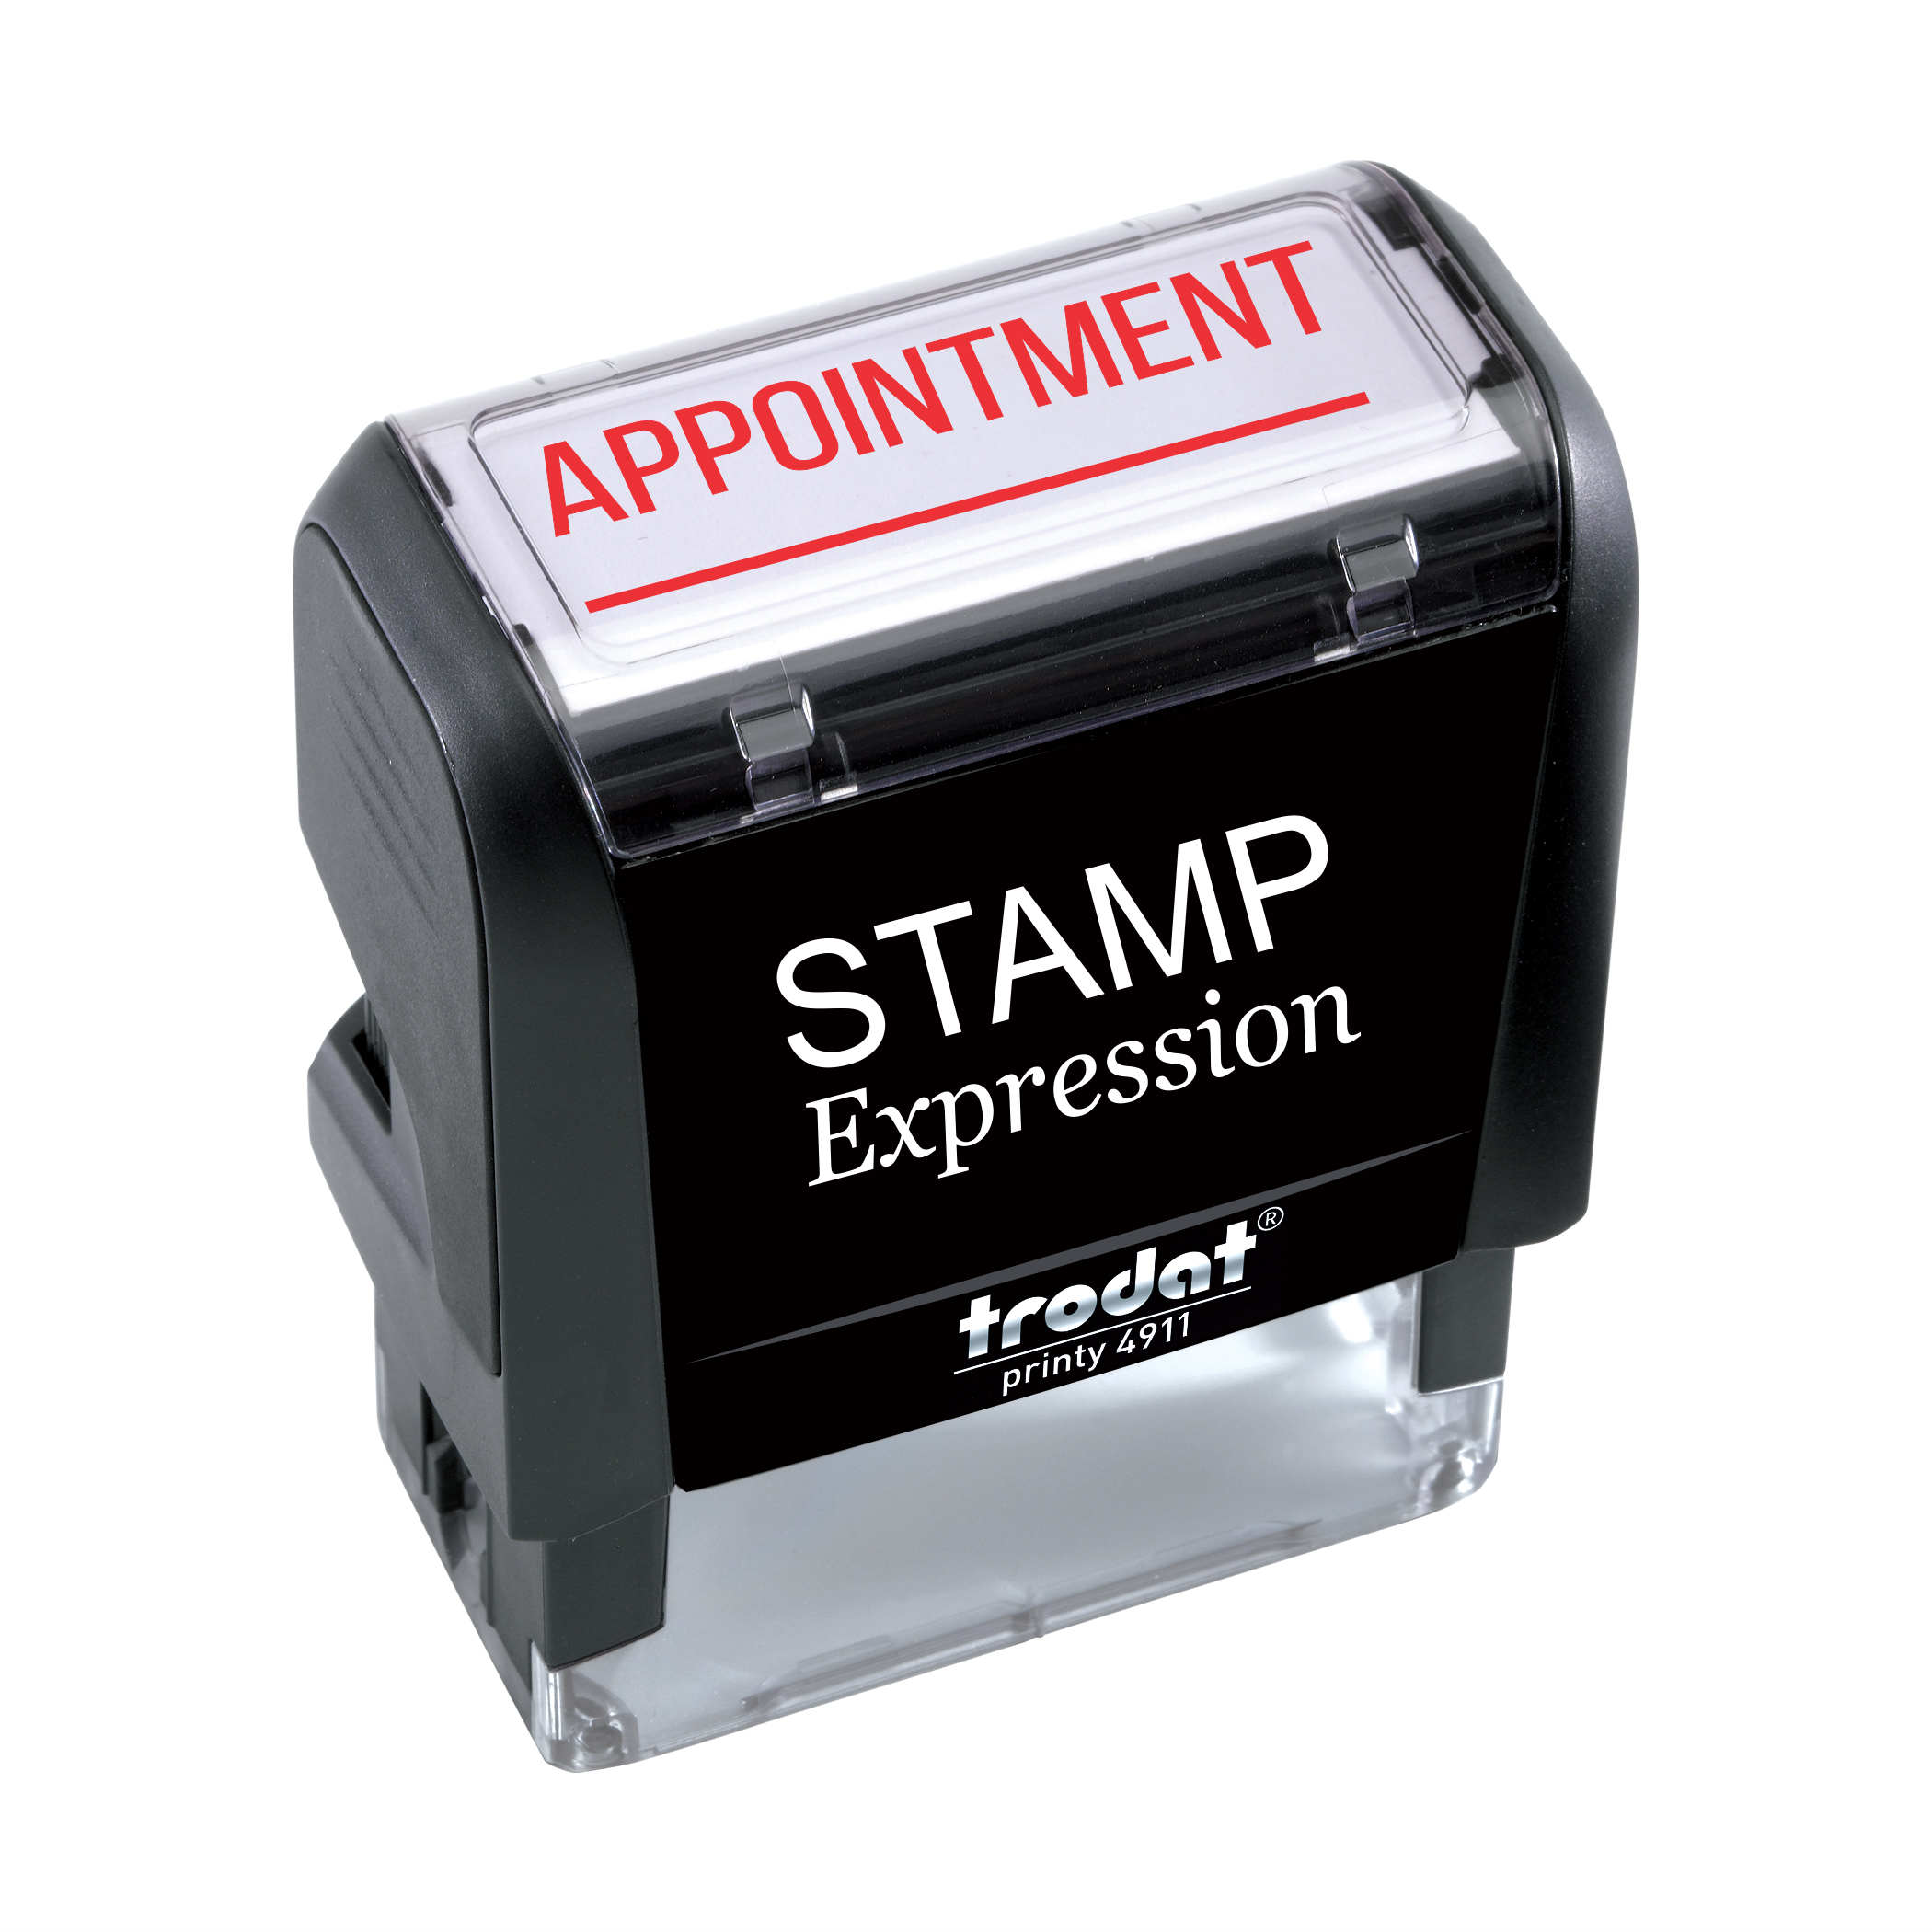 Appointment with Line Office Self Inking Rubber Stamp